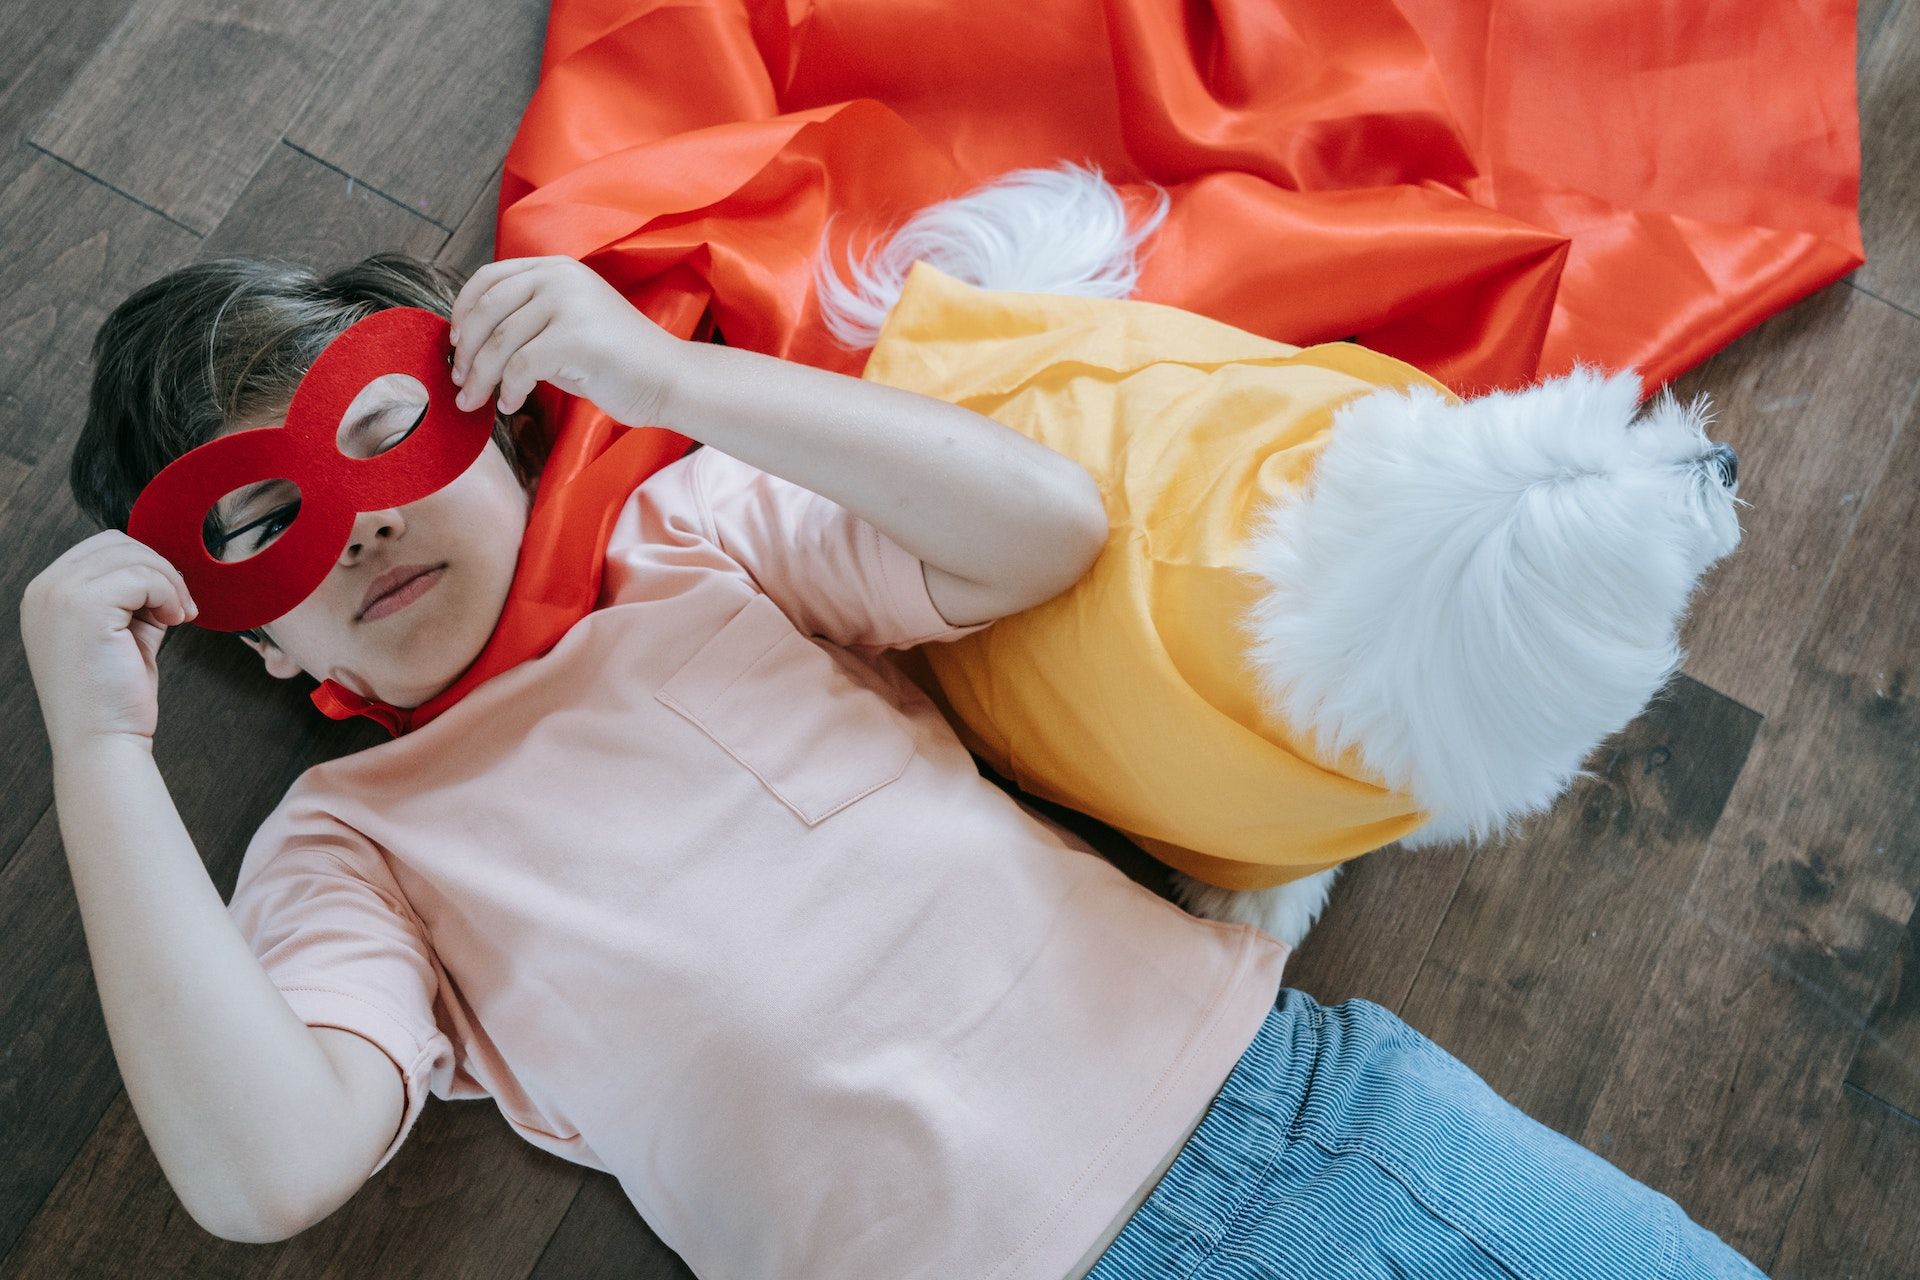 Boy wearing mask and cape while laying on floor.